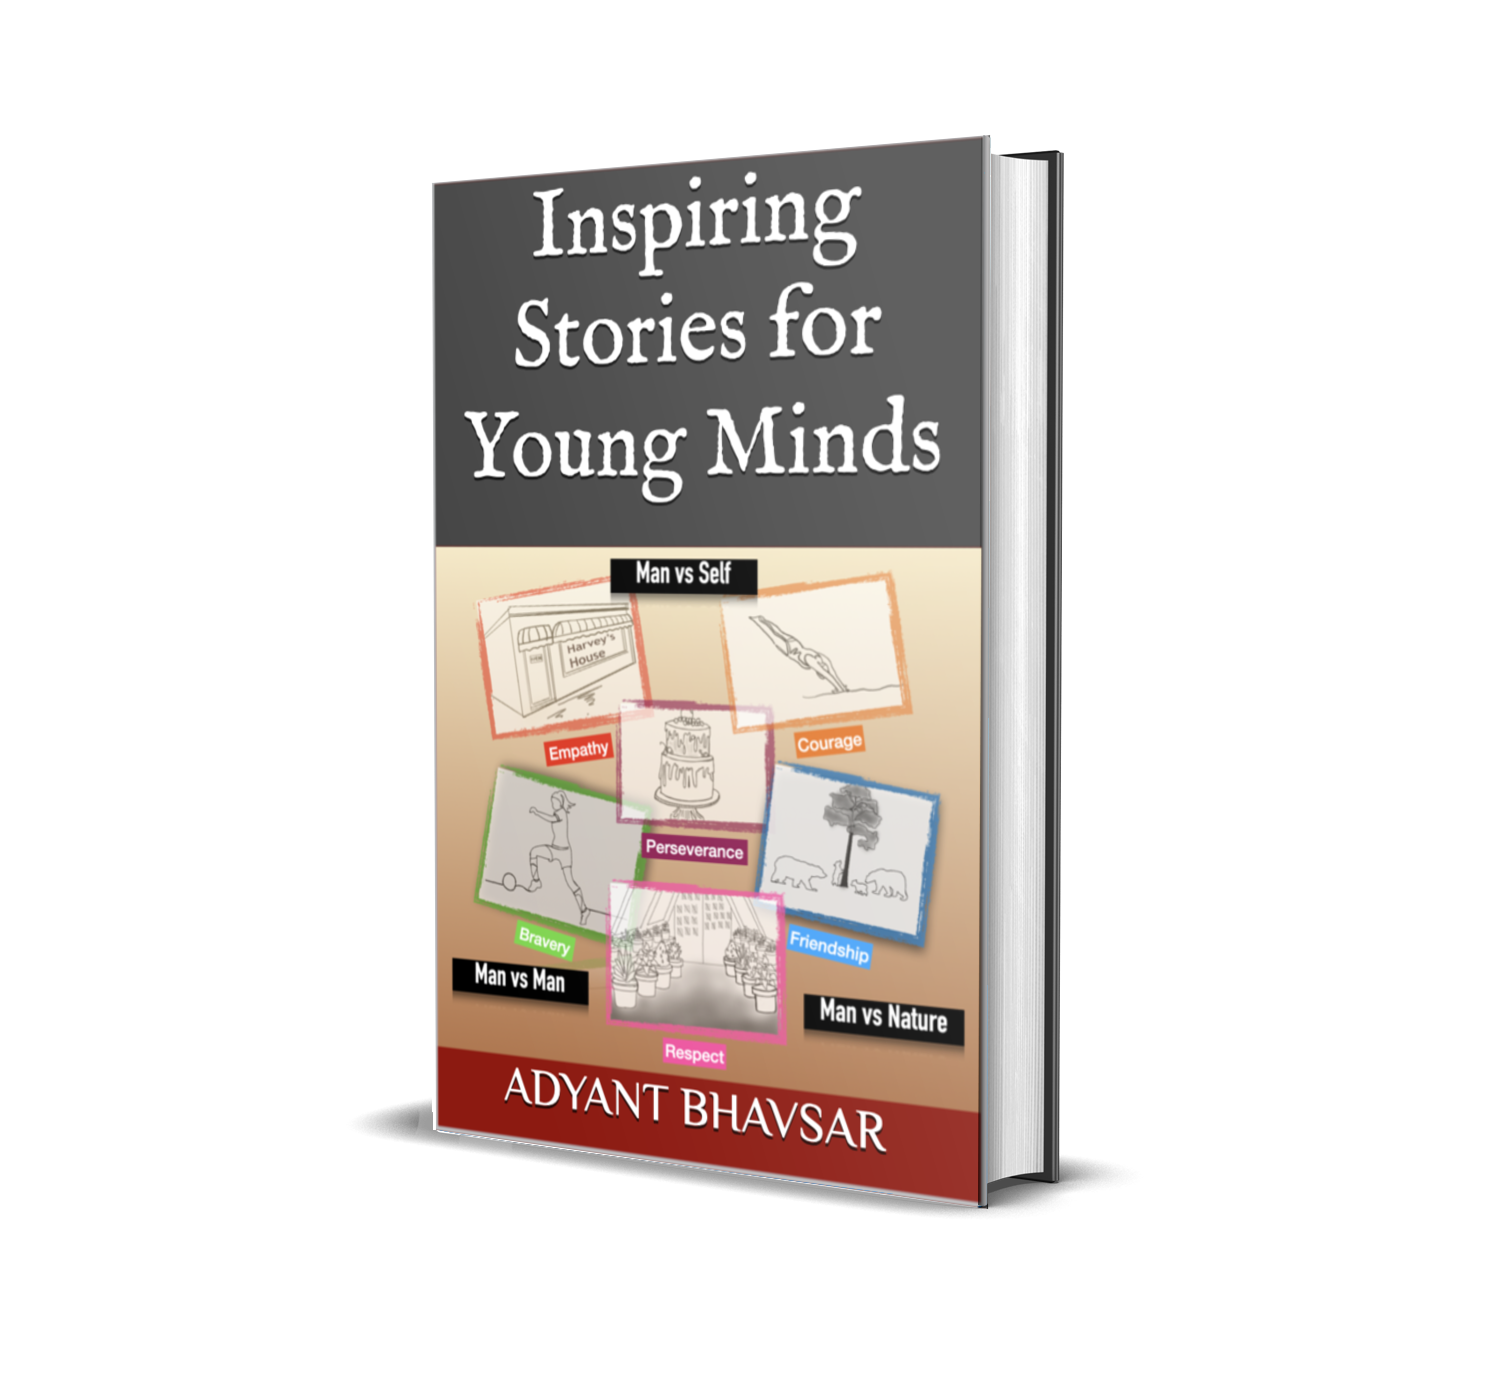 FREE: Inspiring stories for young minds by Adyant Bhavsar